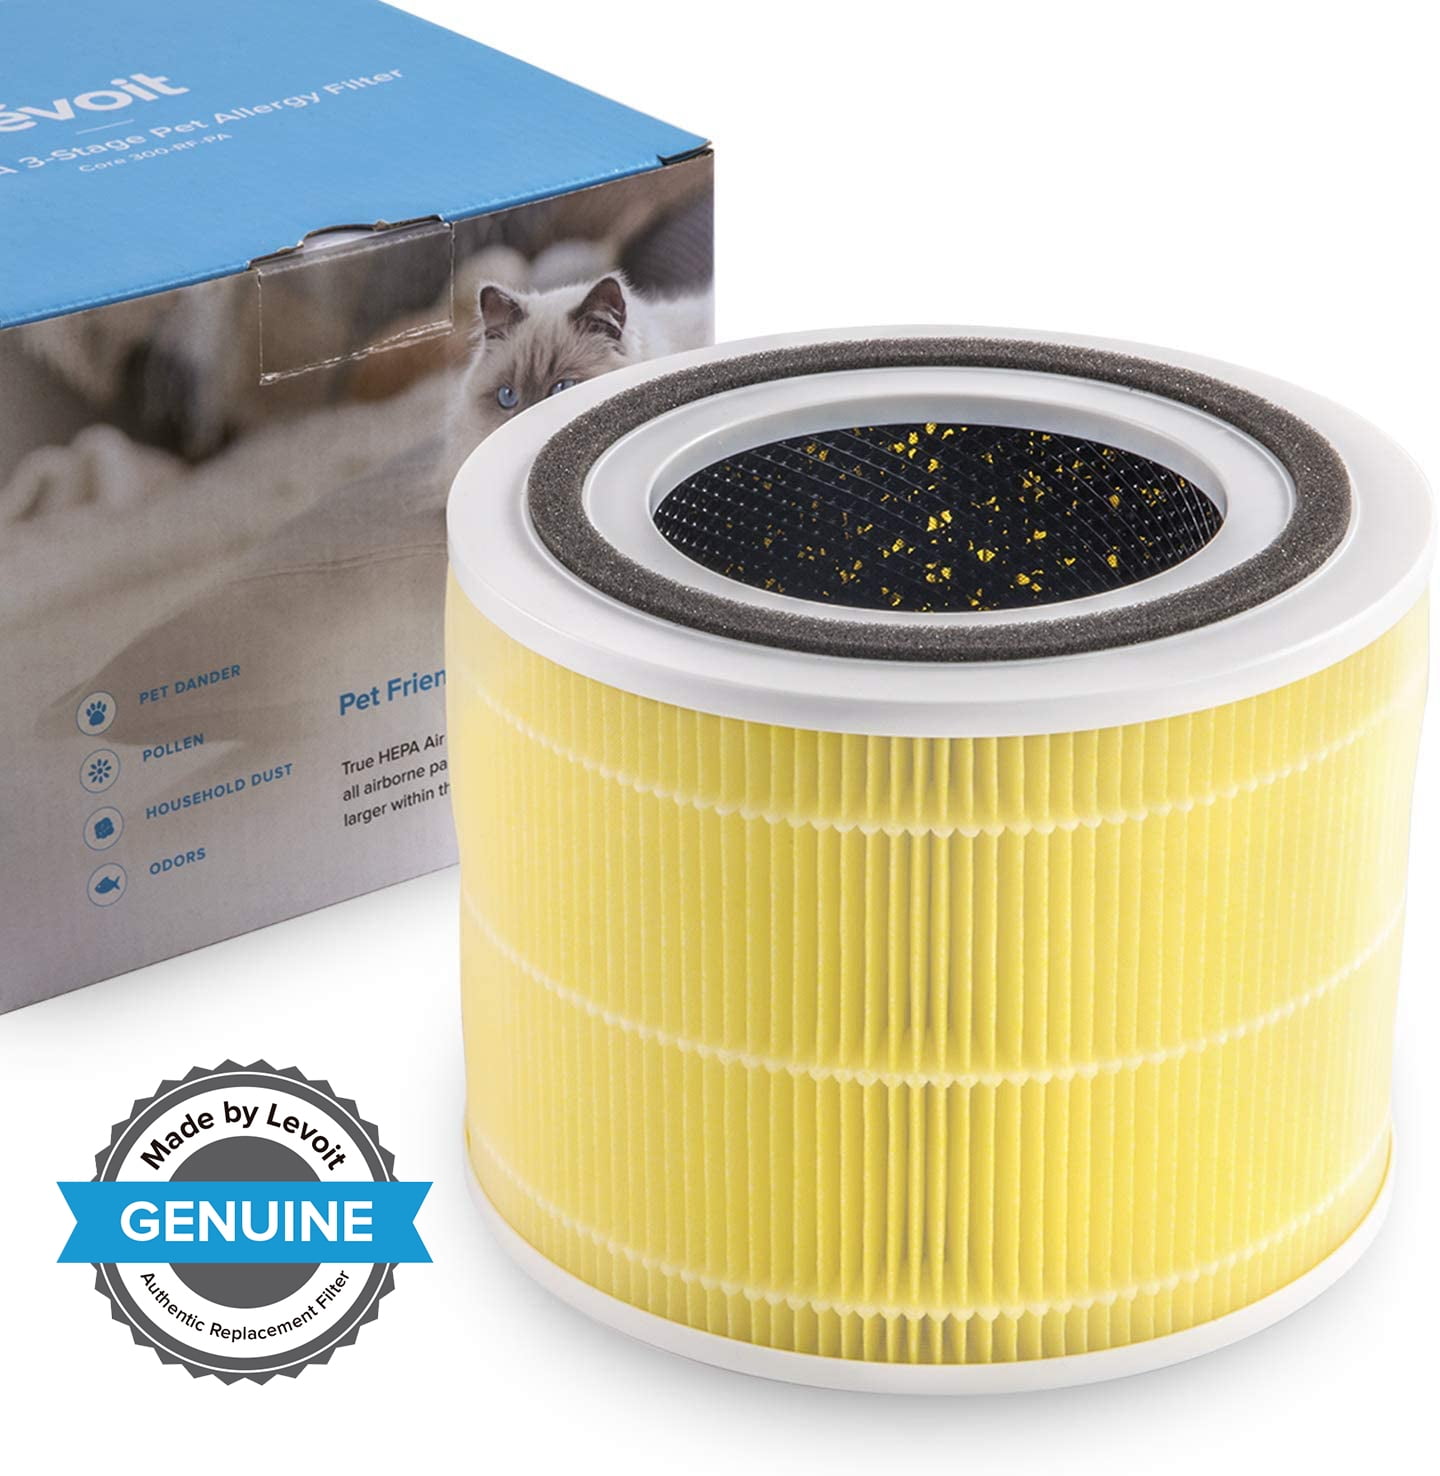  Keedal Core 300 Replacement Filter [Pet Care] Compatible with LEVOIT  Core 300 Filter and Air Purifier Core 300S P350, 3-Stage H13 True HEPA  Filter, Part# Core 300-RF 300-RF-PA